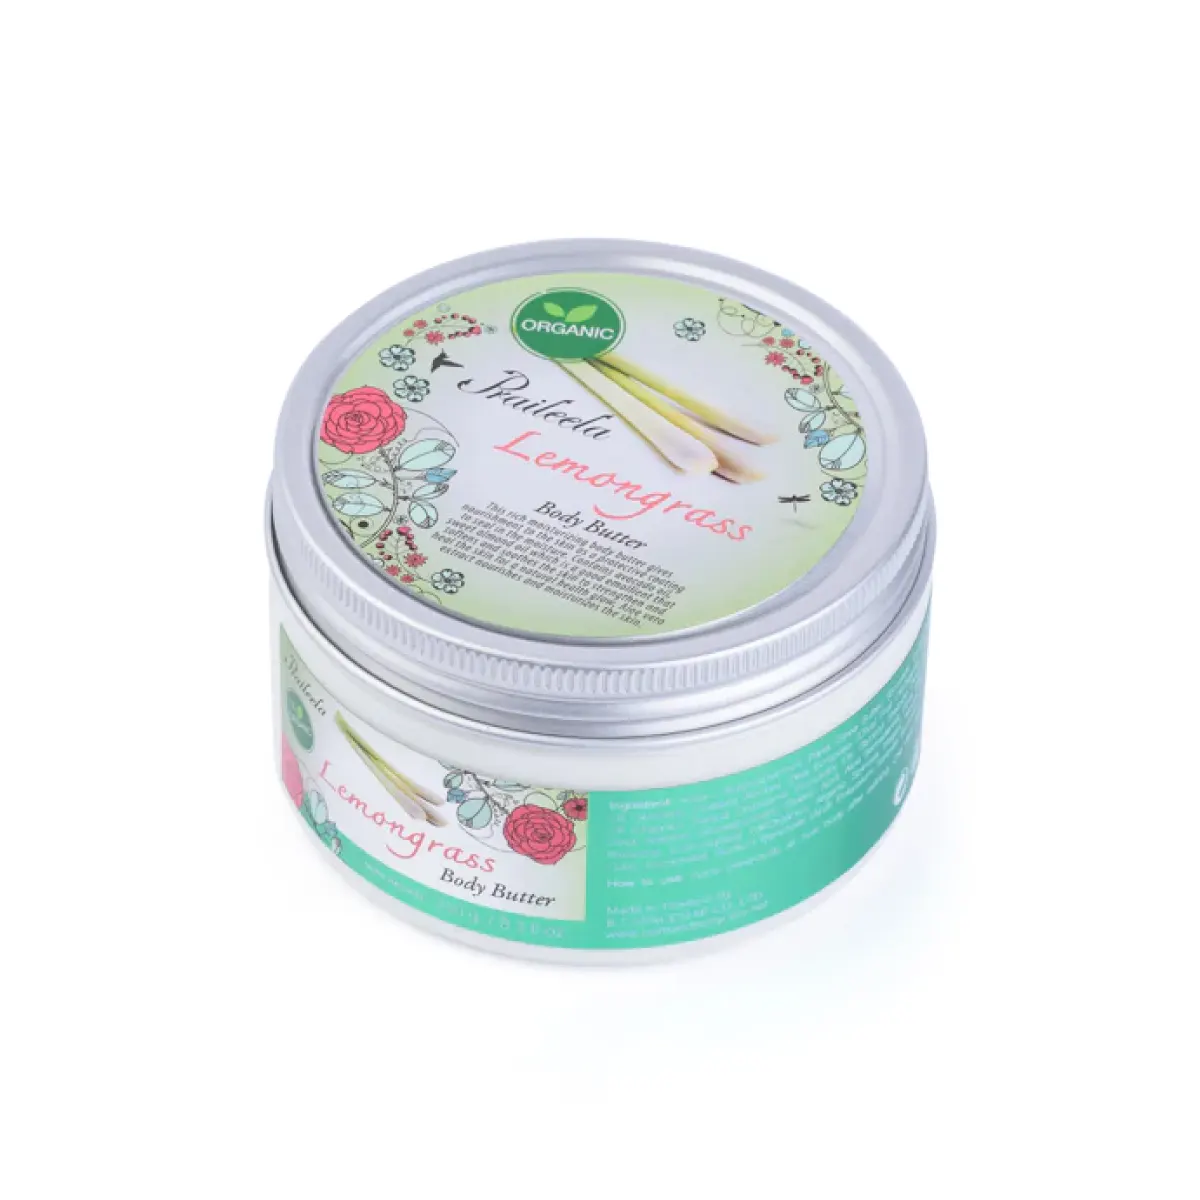 OEM Private Label Lemongrass Body Butter Natural Whitening Moisturizing Nourishing Thailand Bestselling Product From Thailand